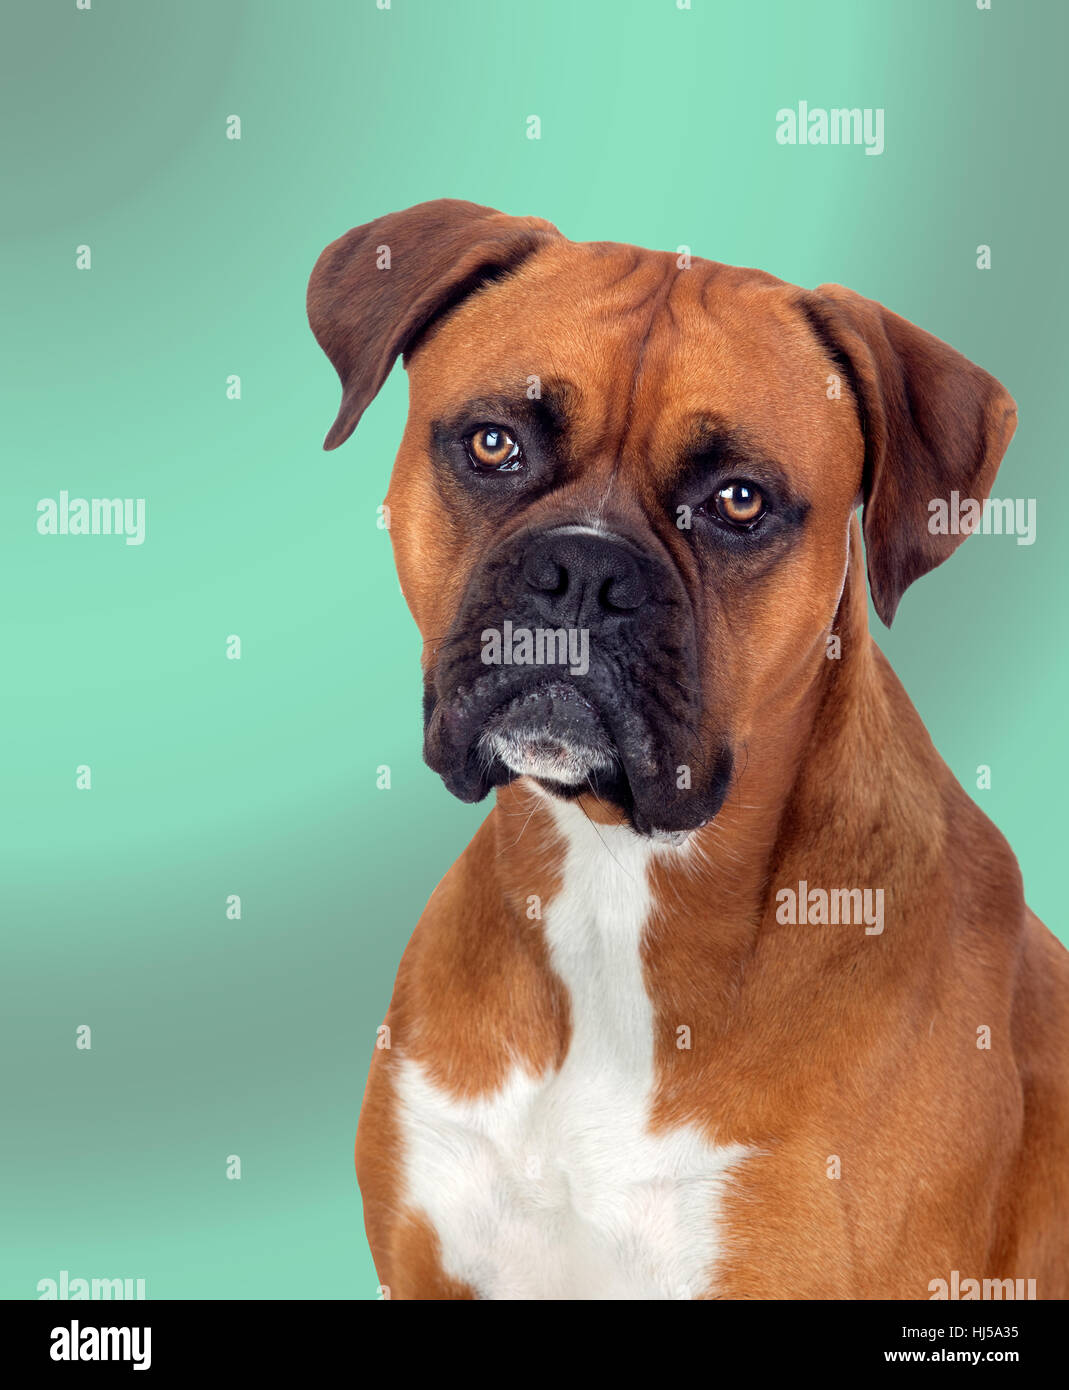 animal, guard, dog, bulldog, boxer, obedient, adorable, green, isolated, Stock Photo